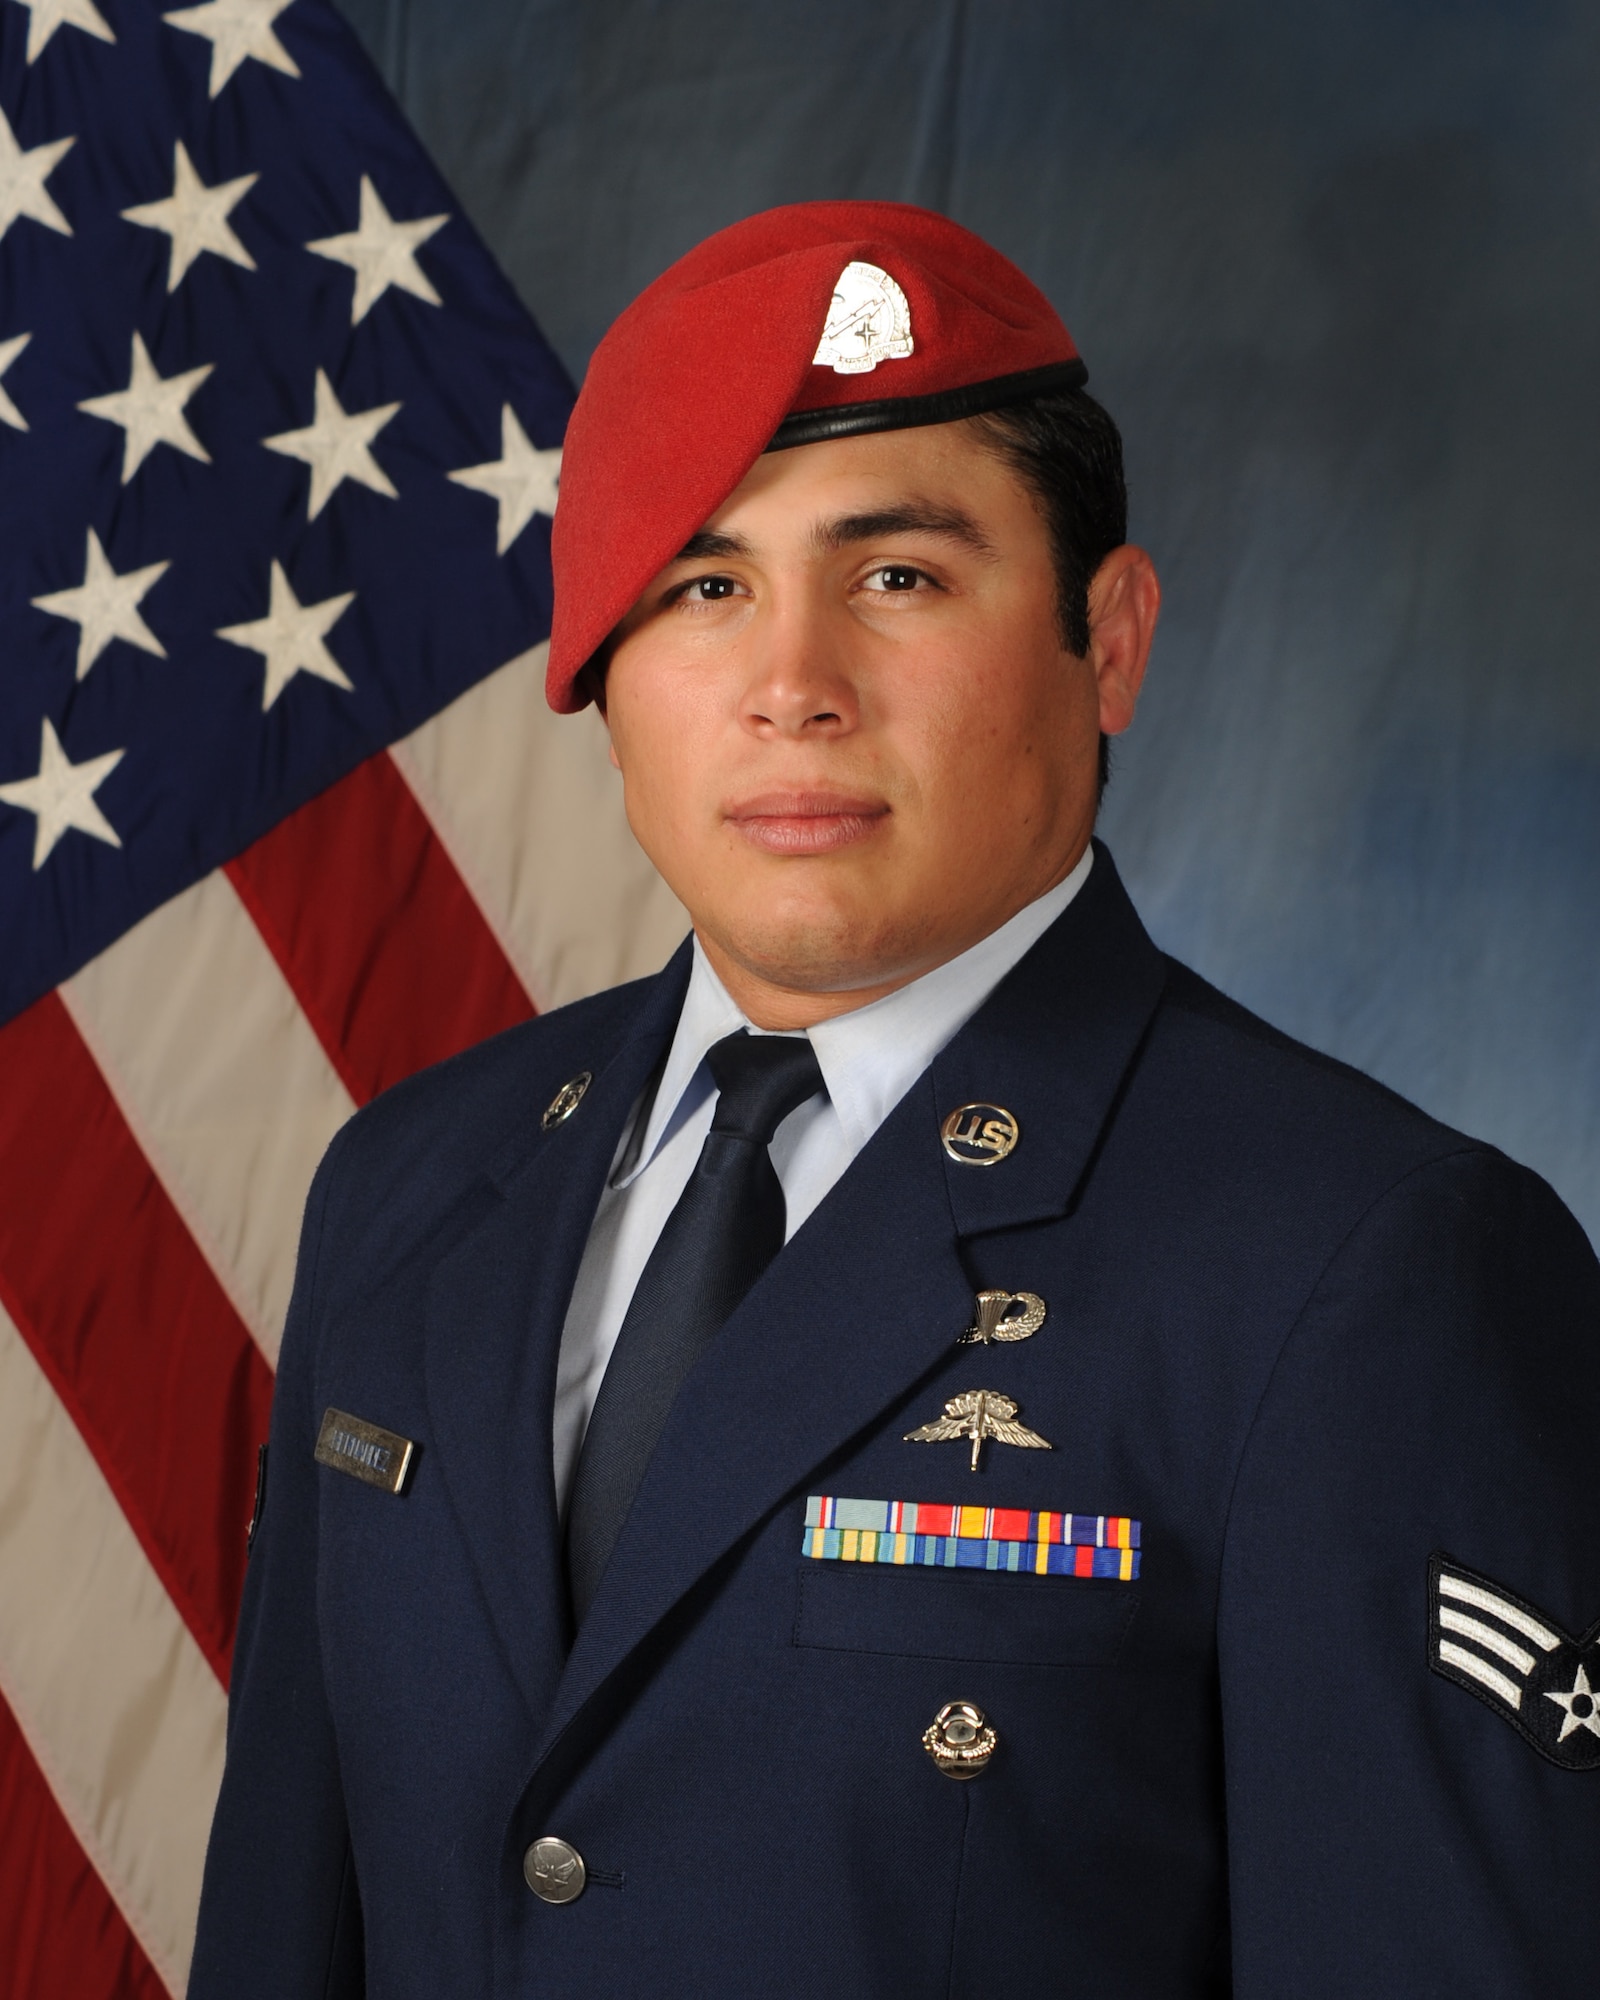 Staff Sgt. Jorge A. Hernandez, 26, a Special Tactics combat controller with the 23rd Special Tactics Squadron, died in an off duty incident in Nashville, Tennessee, Jan. 1, 2019.